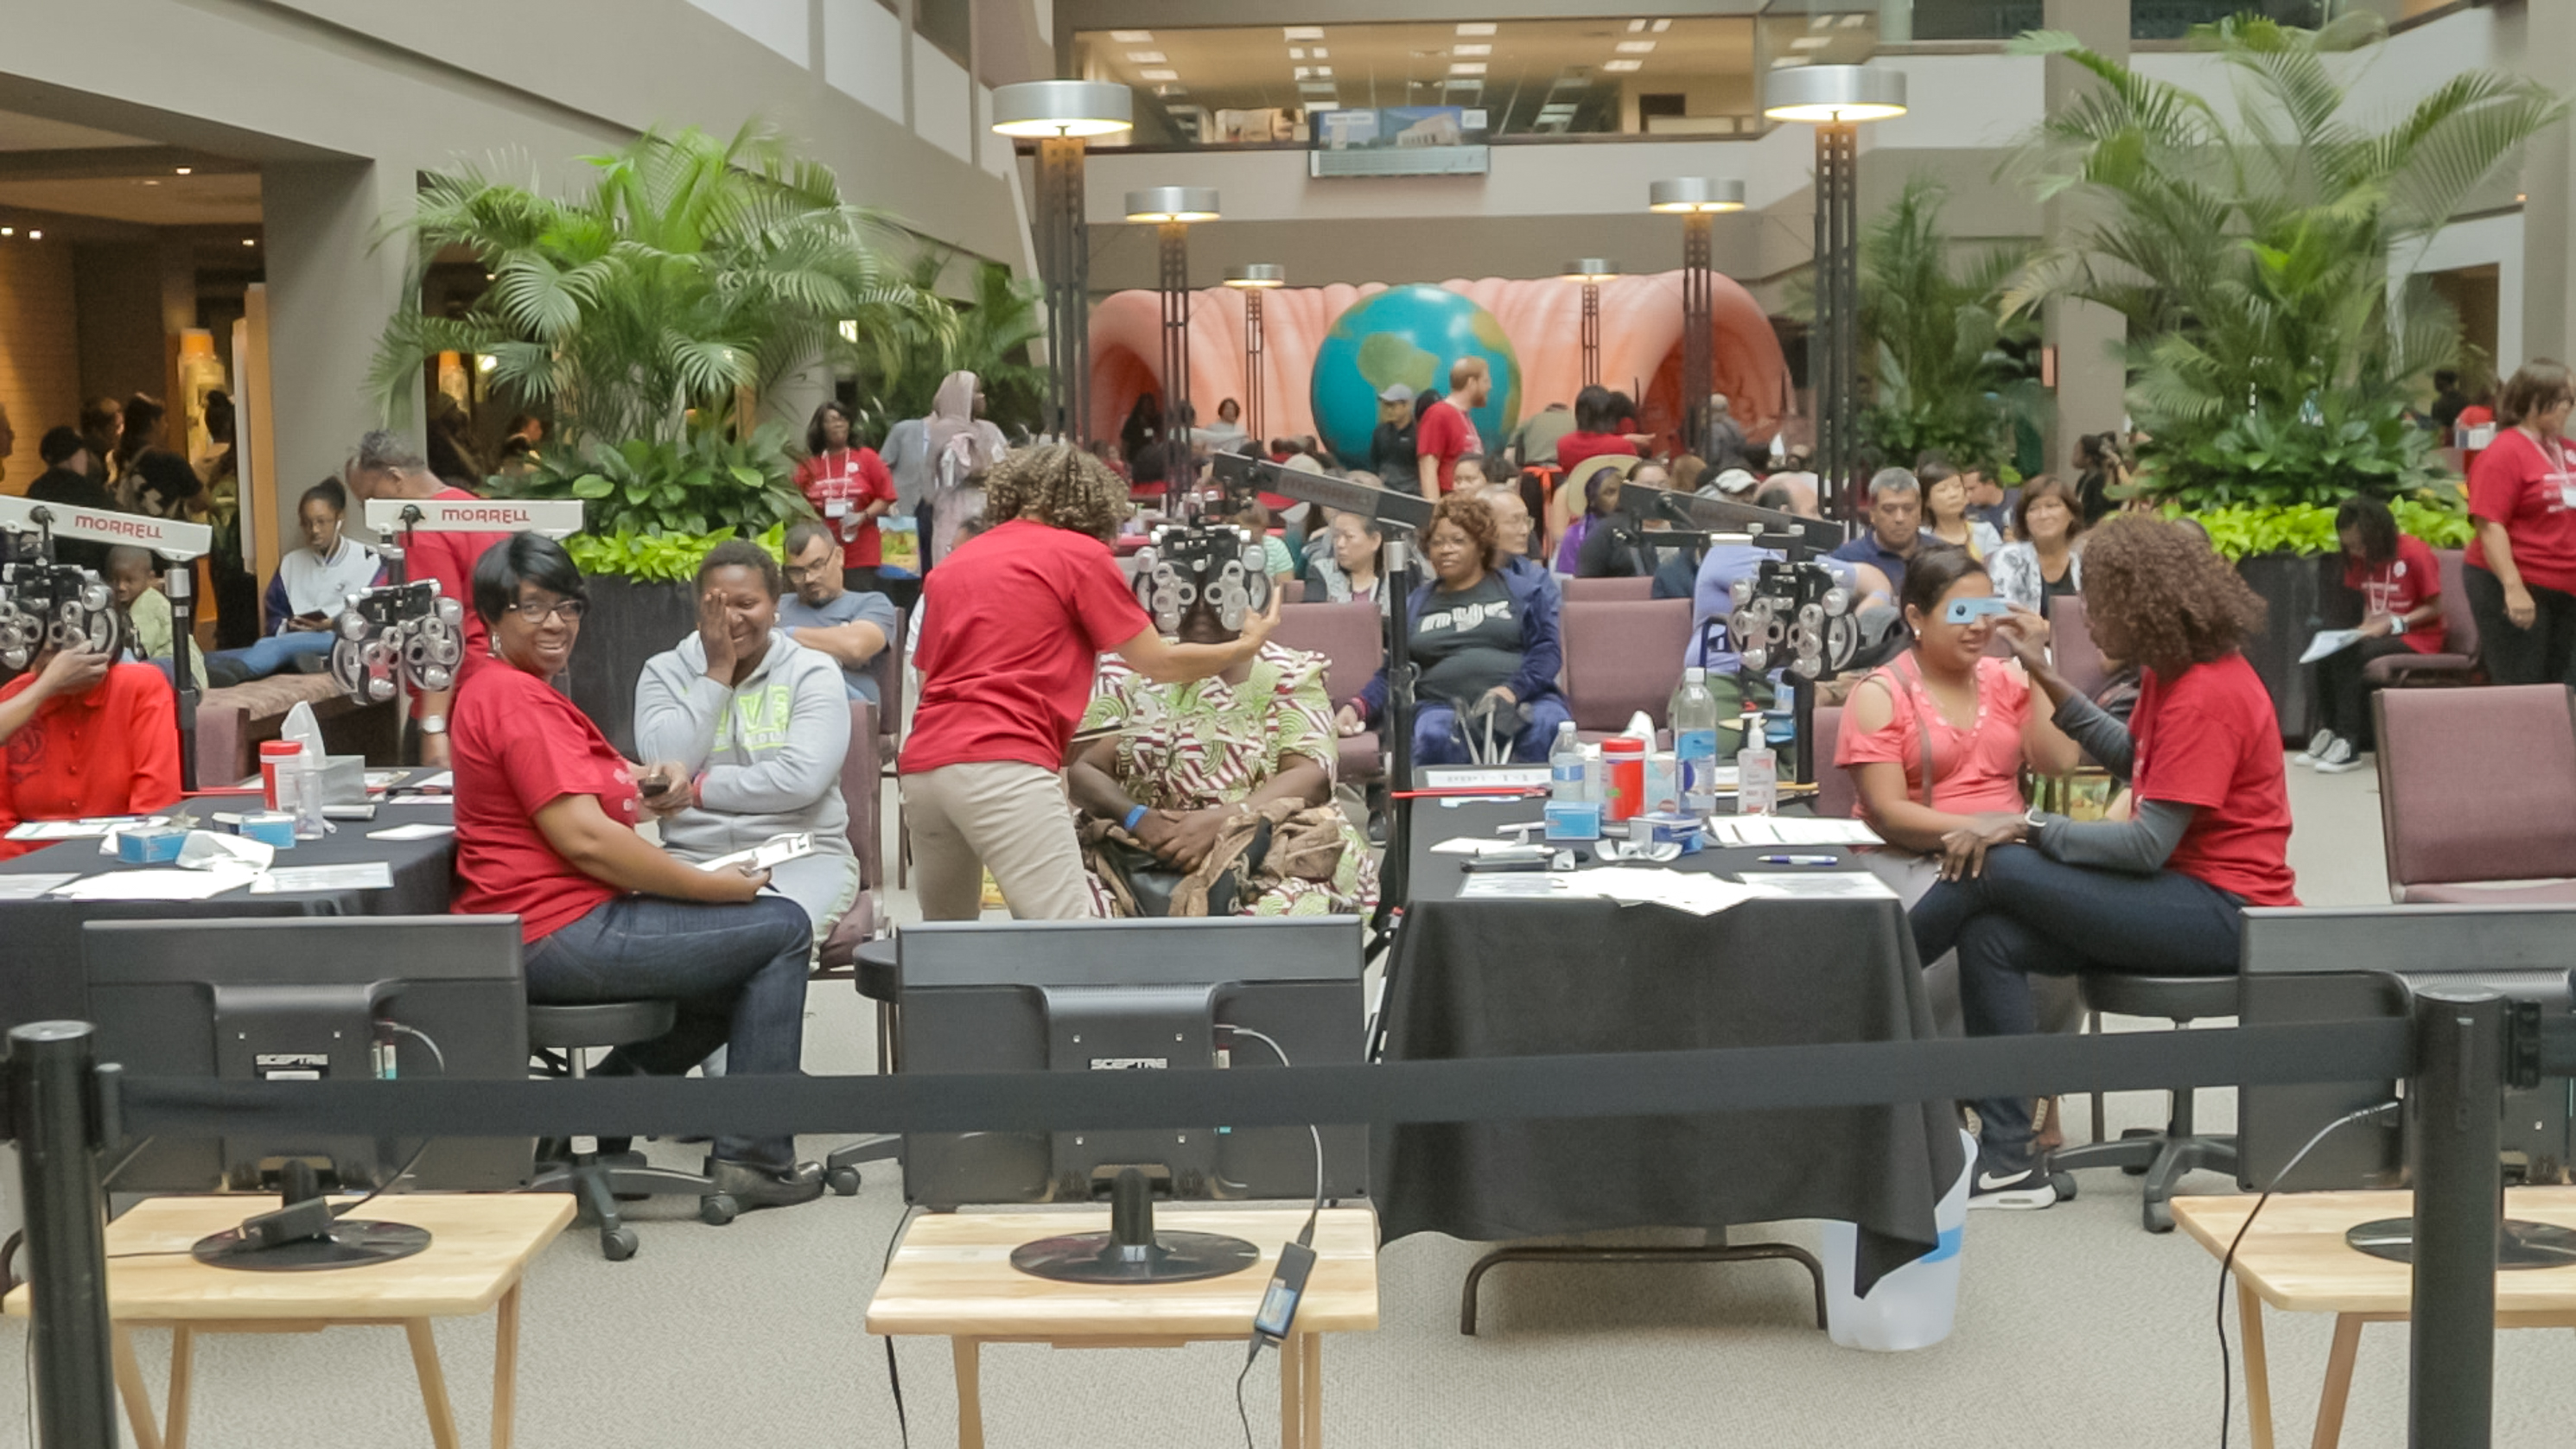 More than 1,200 people were served at the health fair held at the General Conference world headquarters. (Photo: Robert Baker) 